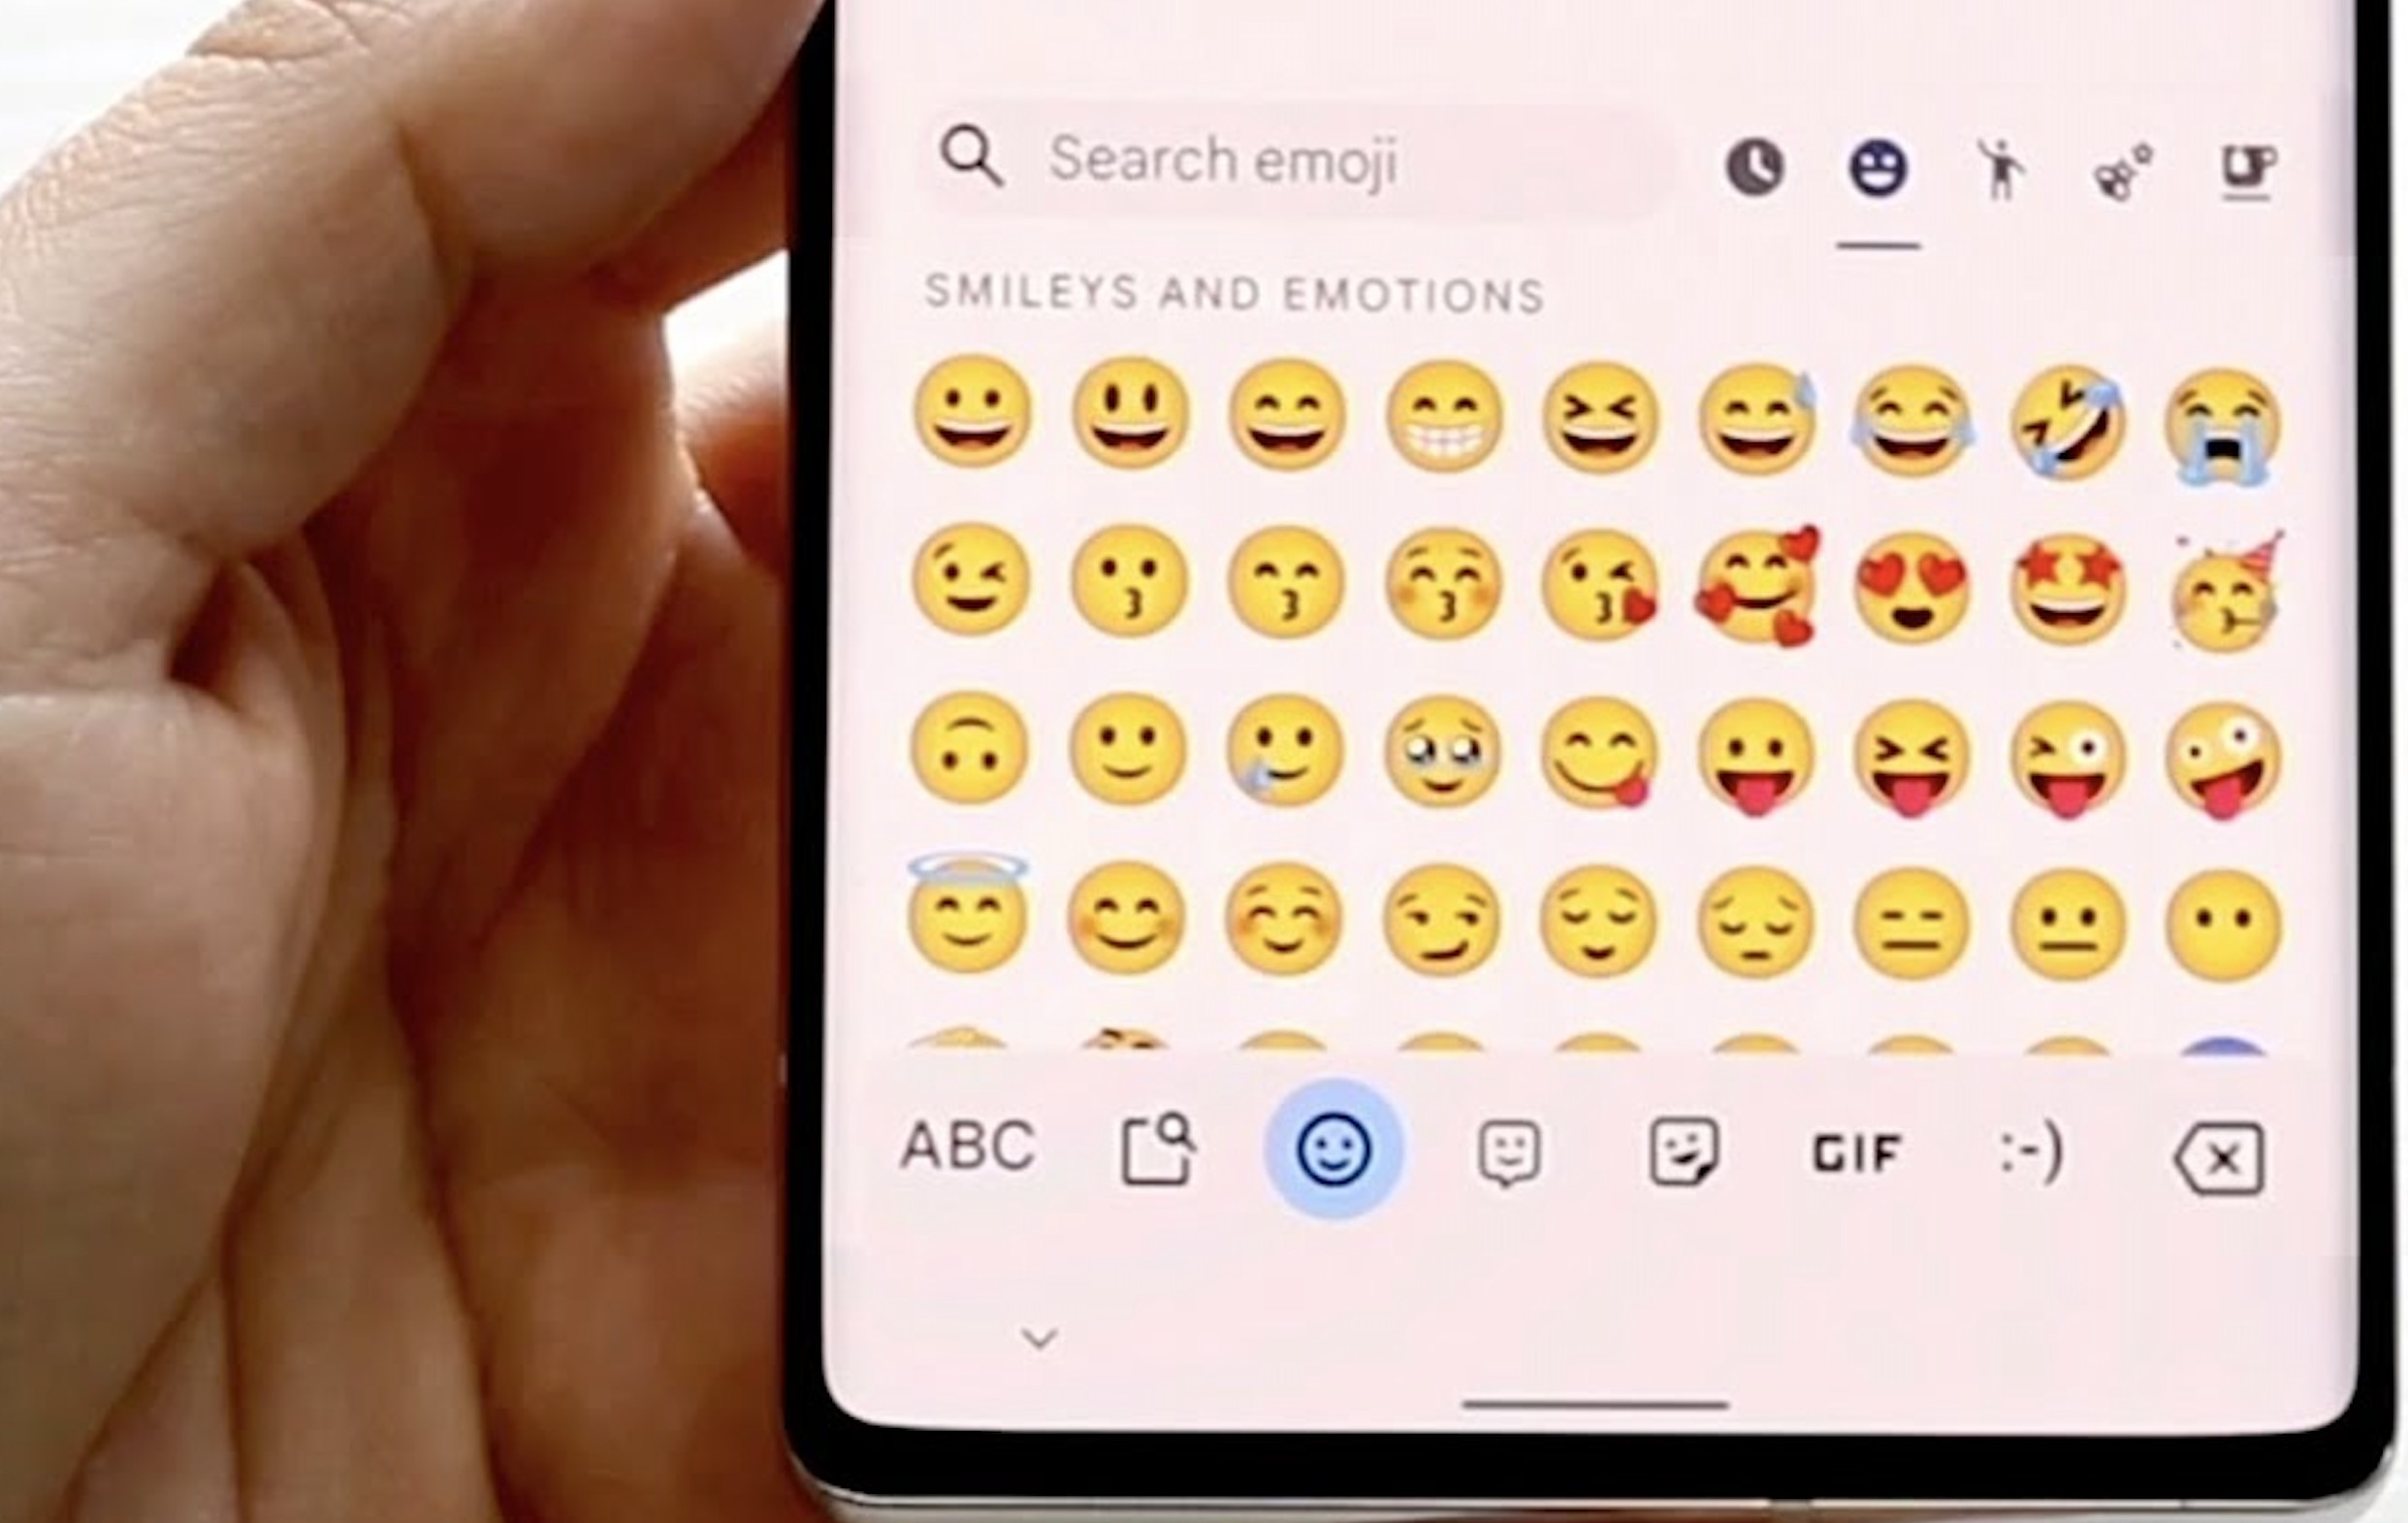 Where Did My Emojis Go? How to Restore Your Samsung Keyboard Emojis